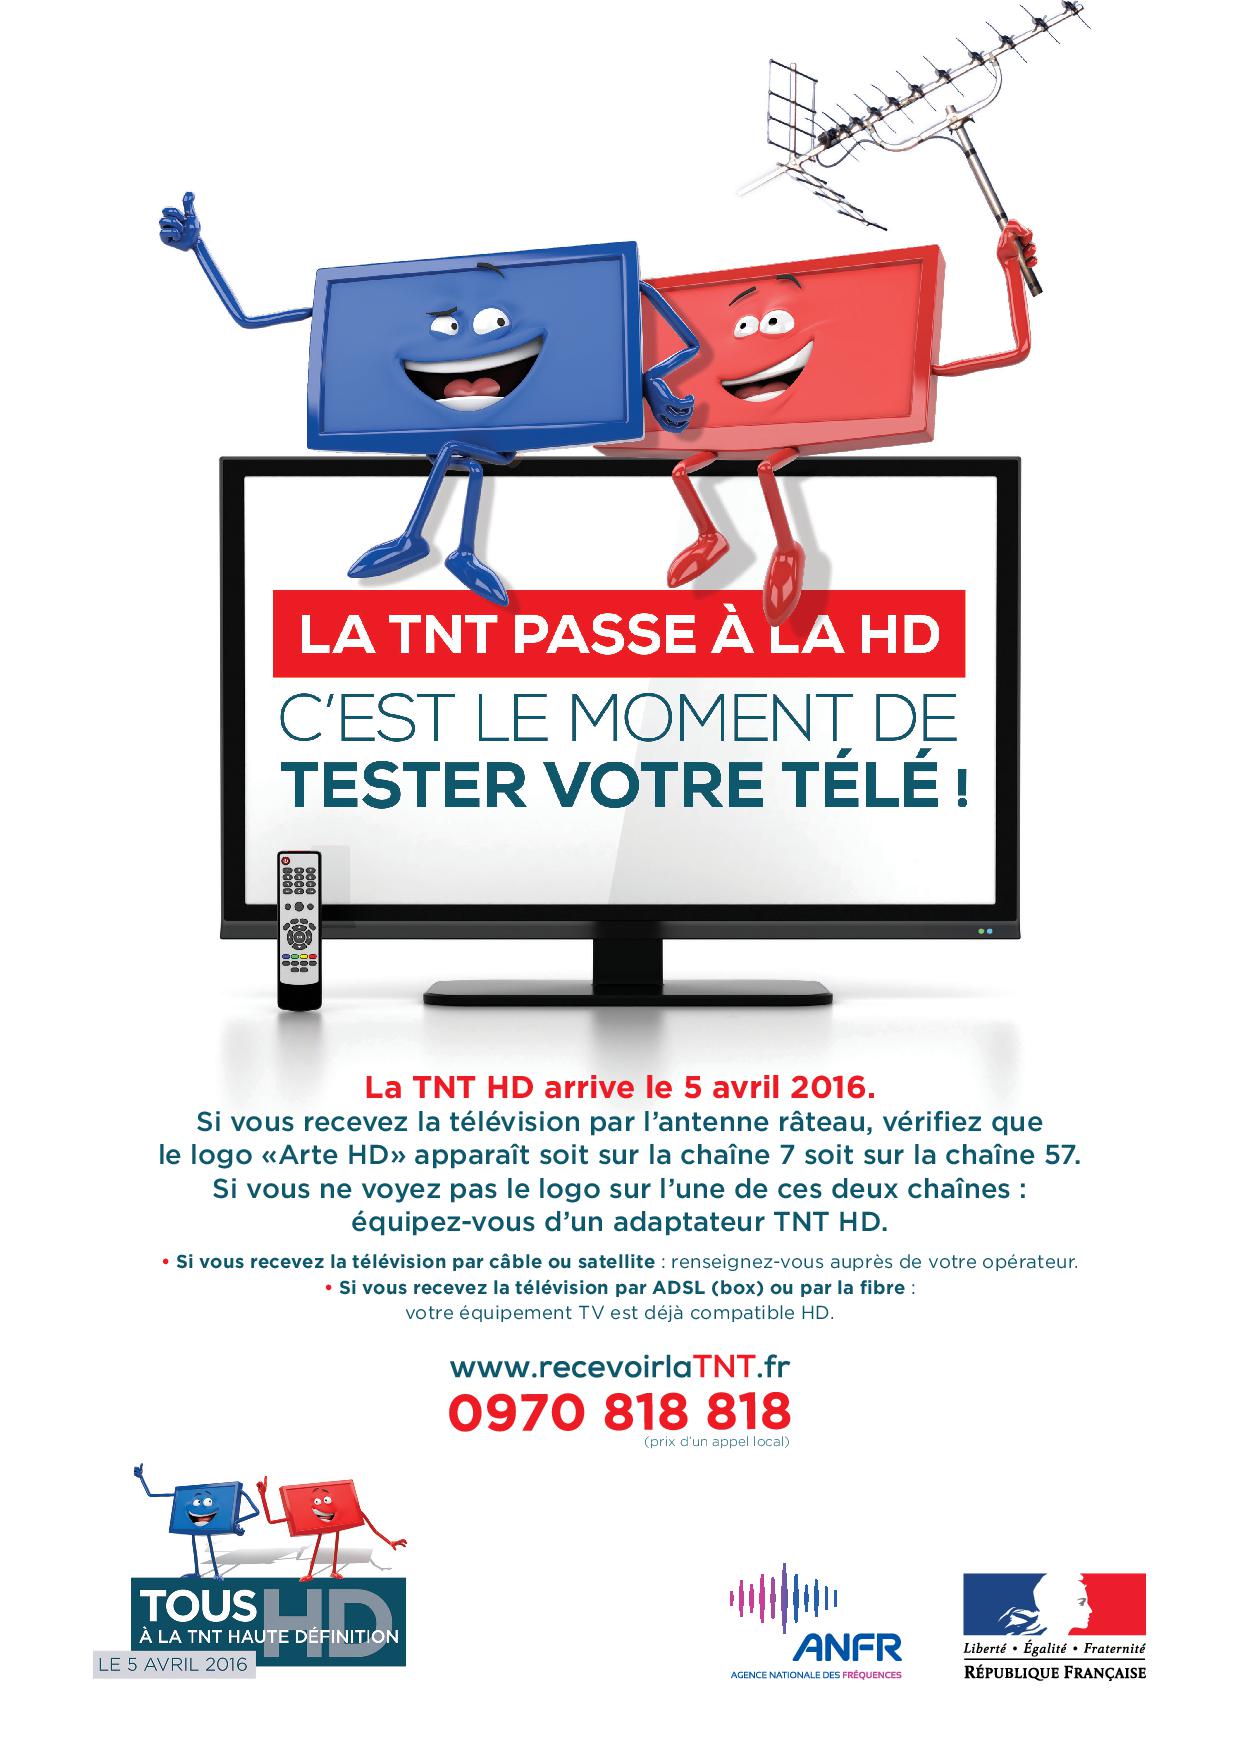 ANFR-Affiche-Kit_communication-HD